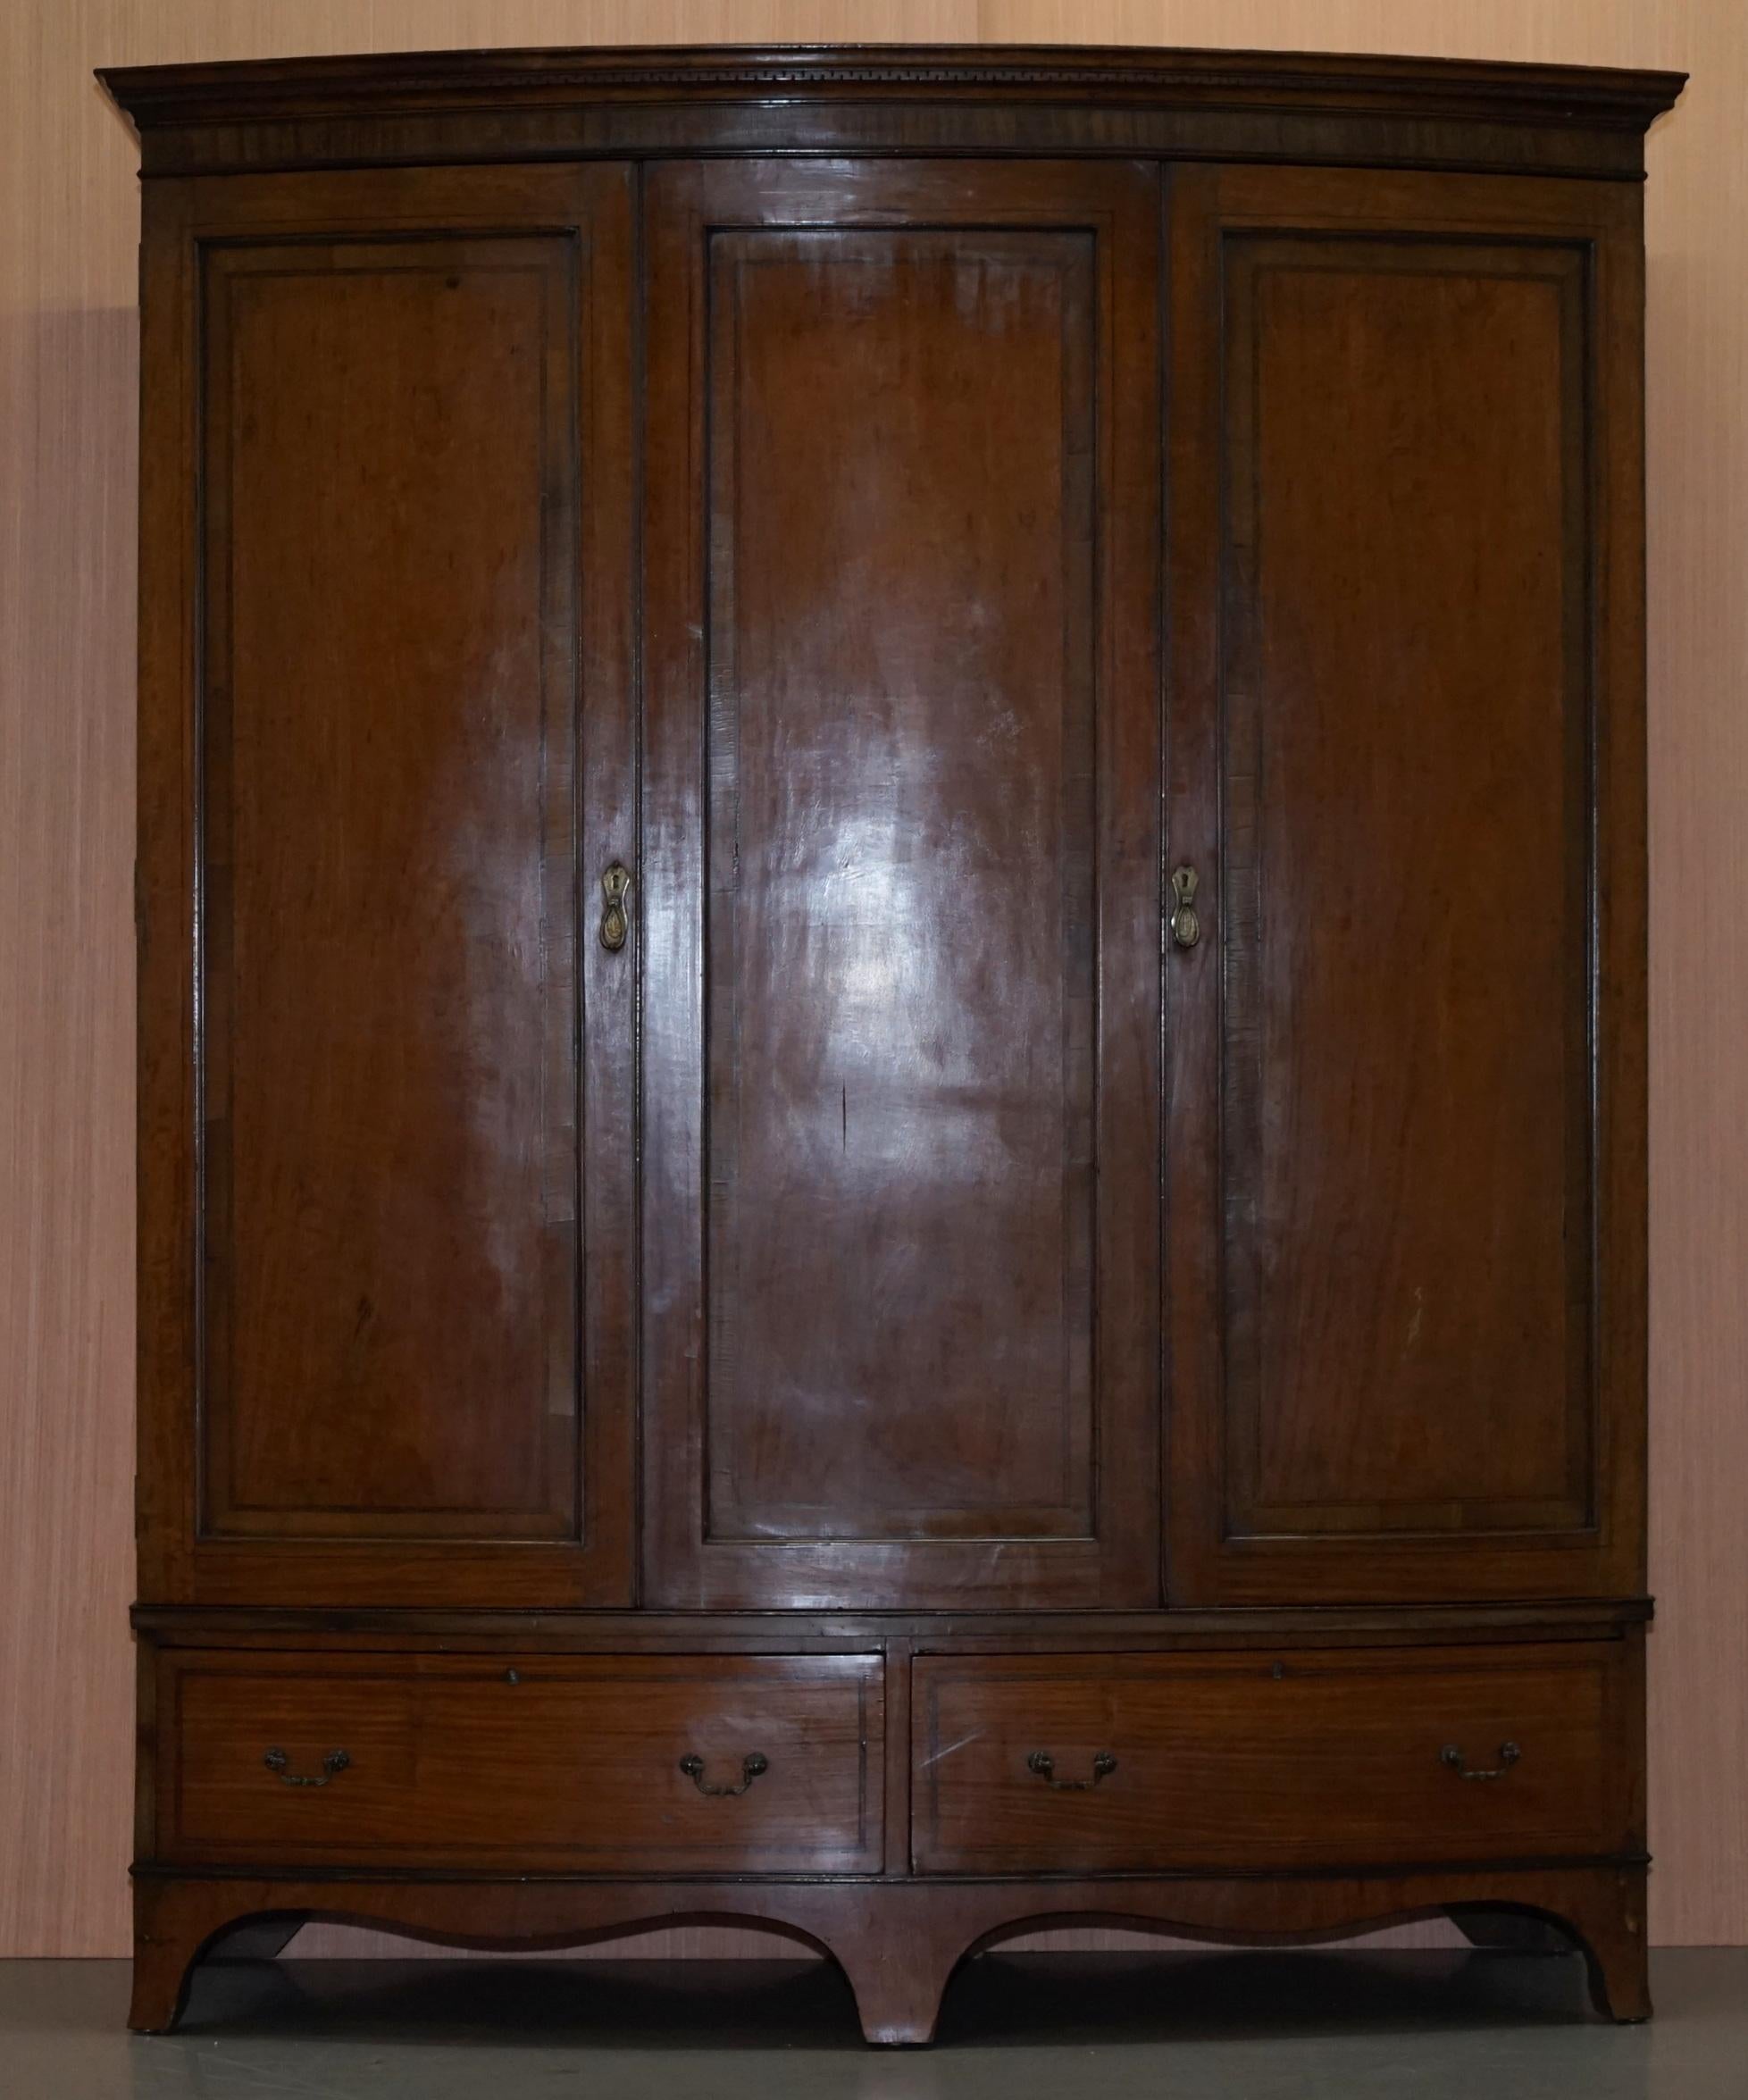 We are delighted to offer for sale this stunning Victorian large bow fronted triple wardrobe in solid mahogany that can be fully dismantled for ease of transport and installation

A very good looking and well made piece. This wardrobe offers huge